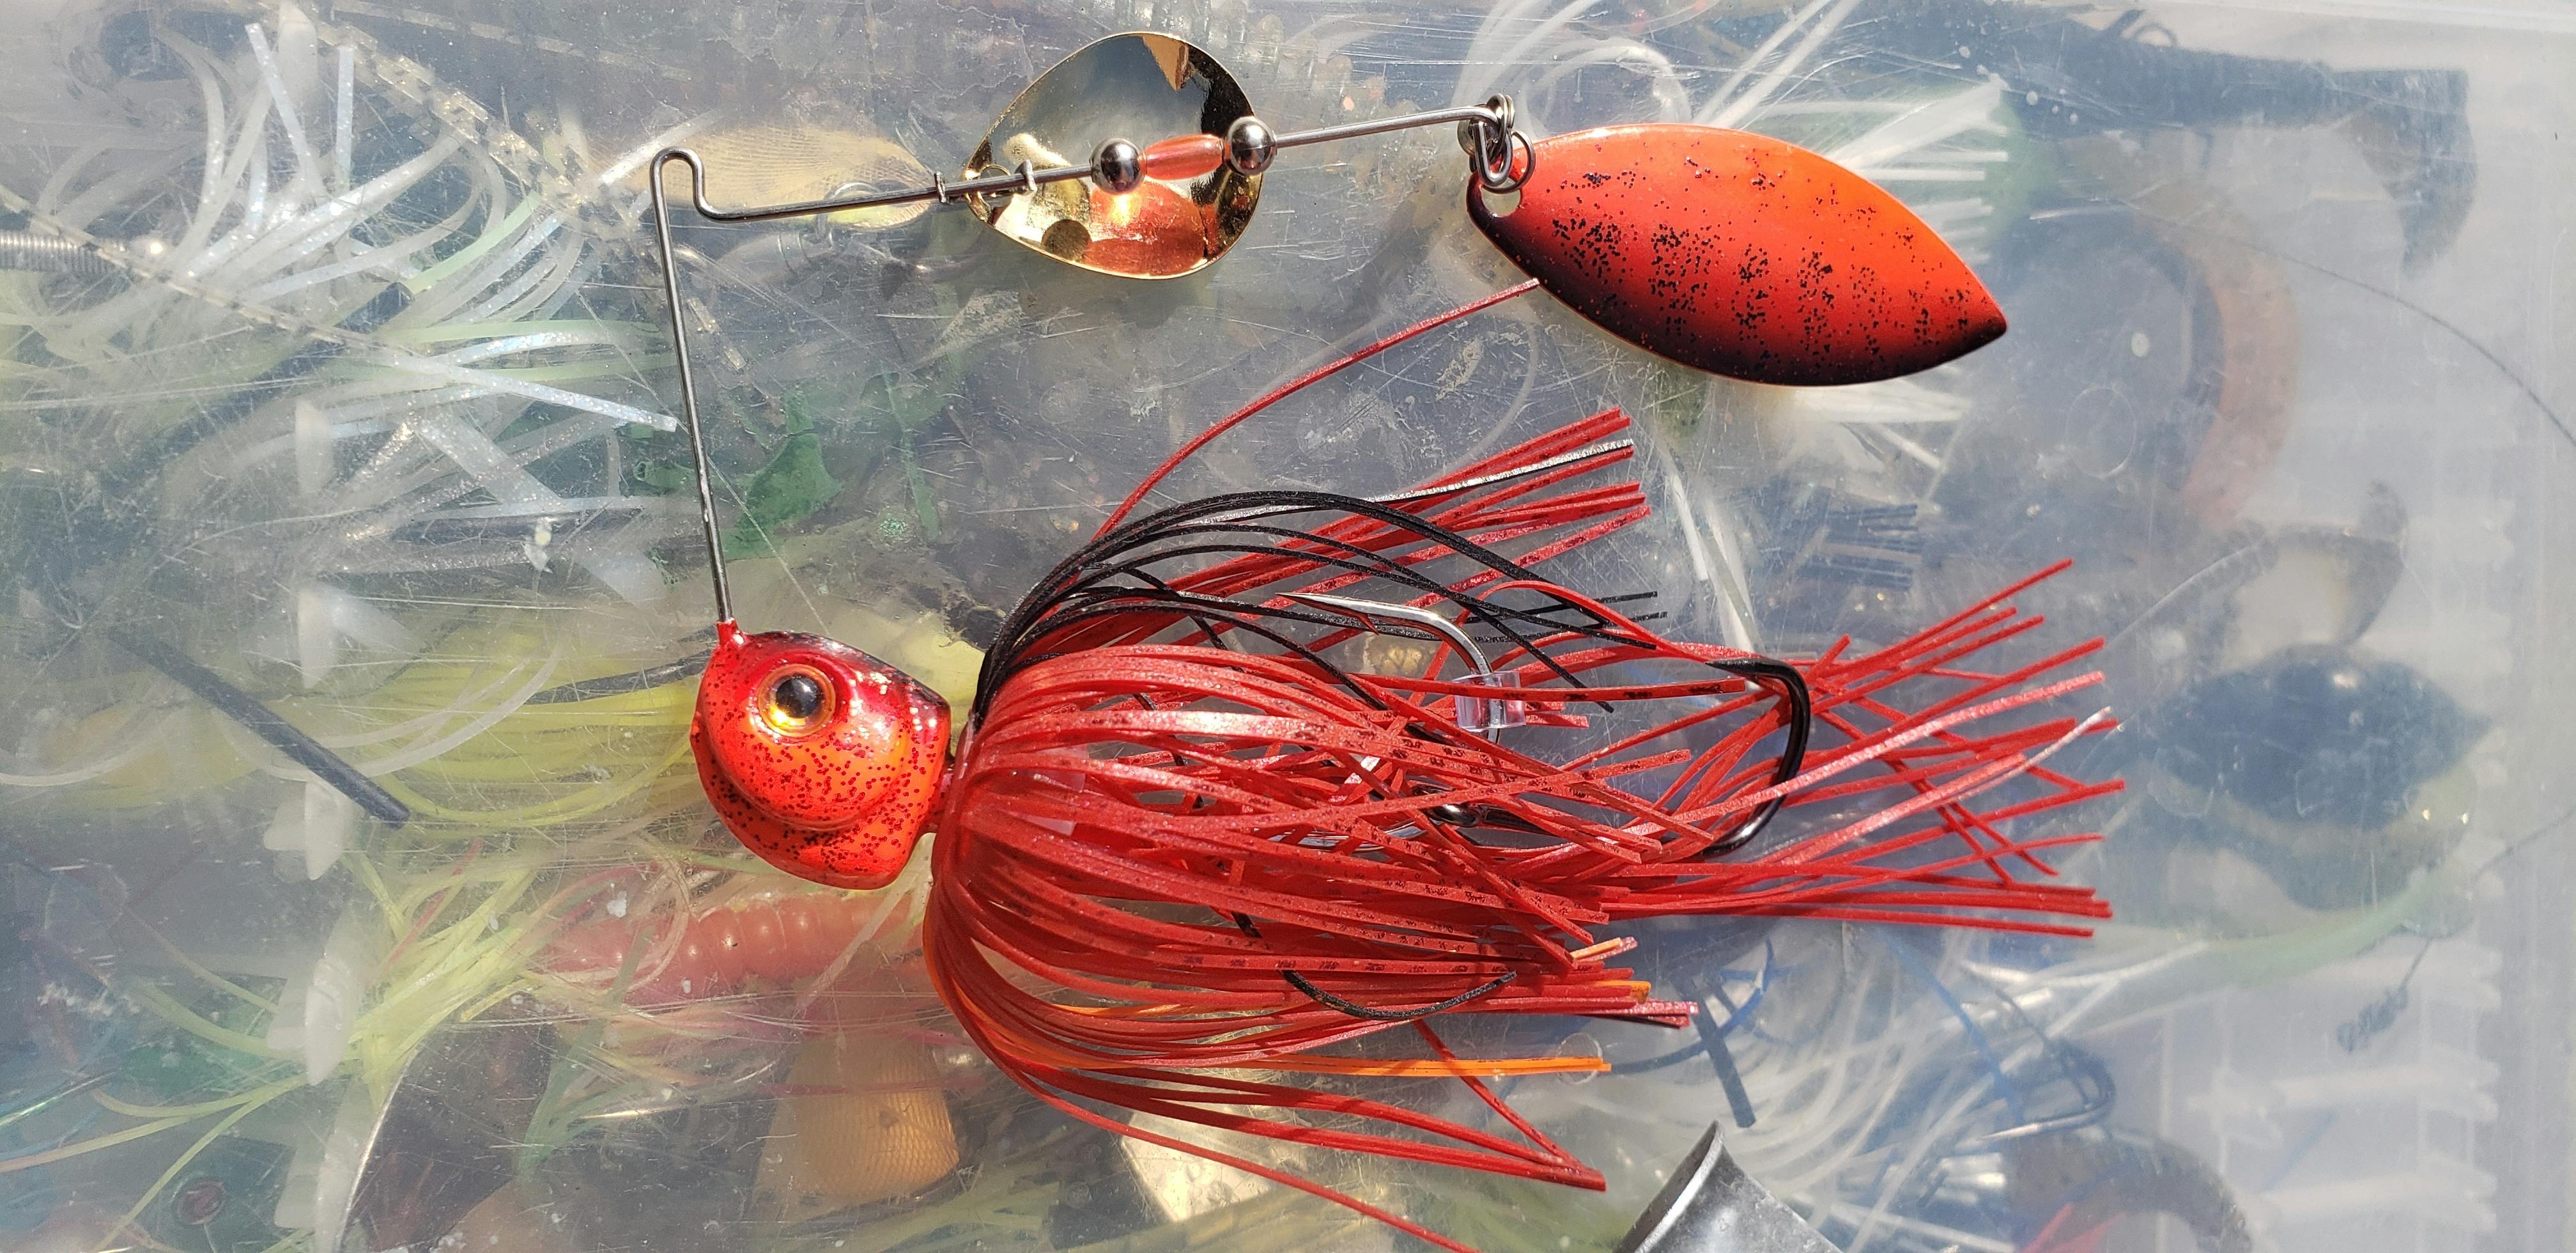 An orange-red spinnerbait from Booyah.